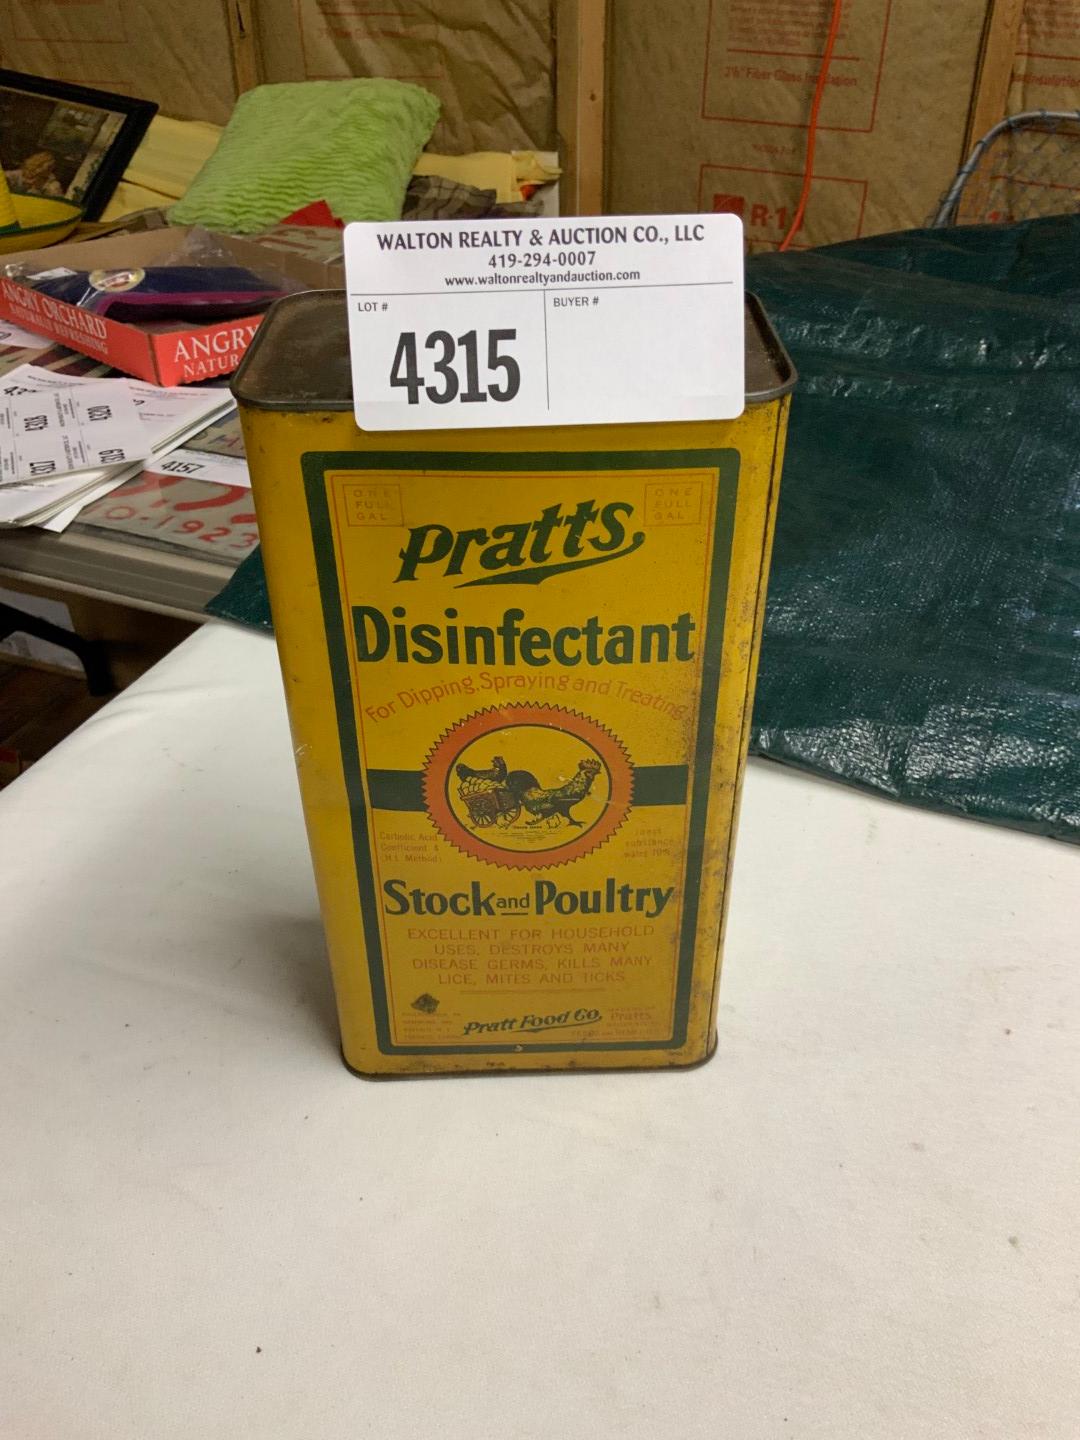 Pratts Disinfectant Stock & Poultry Tin Can